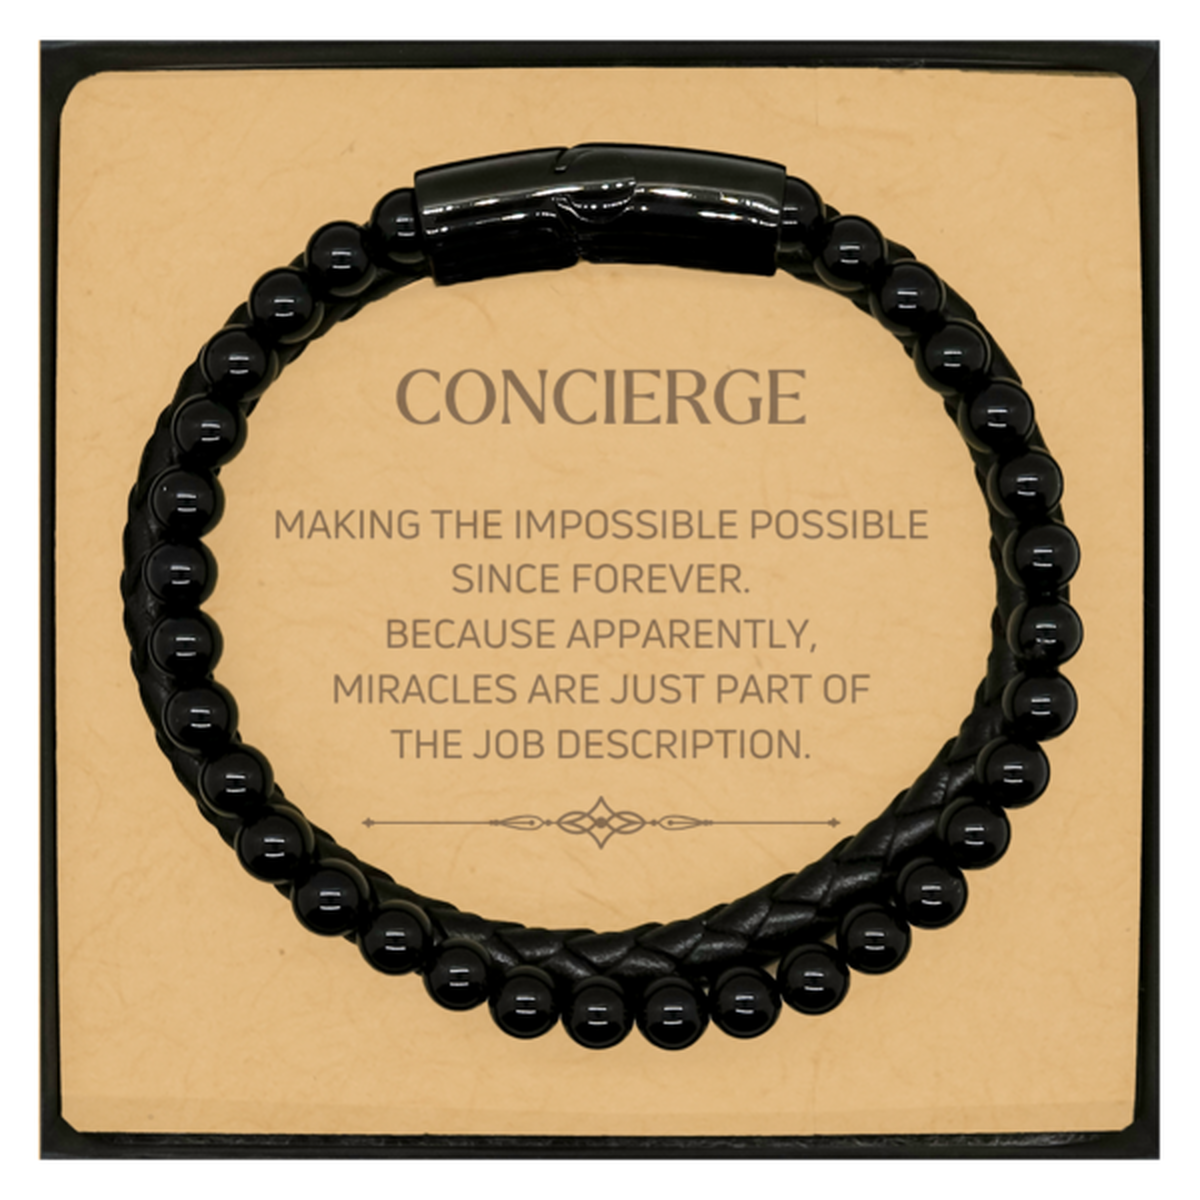 Funny Concierge Gifts, Miracles are just part of the job description, Inspirational Birthday Christmas Stone Leather Bracelets For Concierge, Men, Women, Coworkers, Friends, Boss